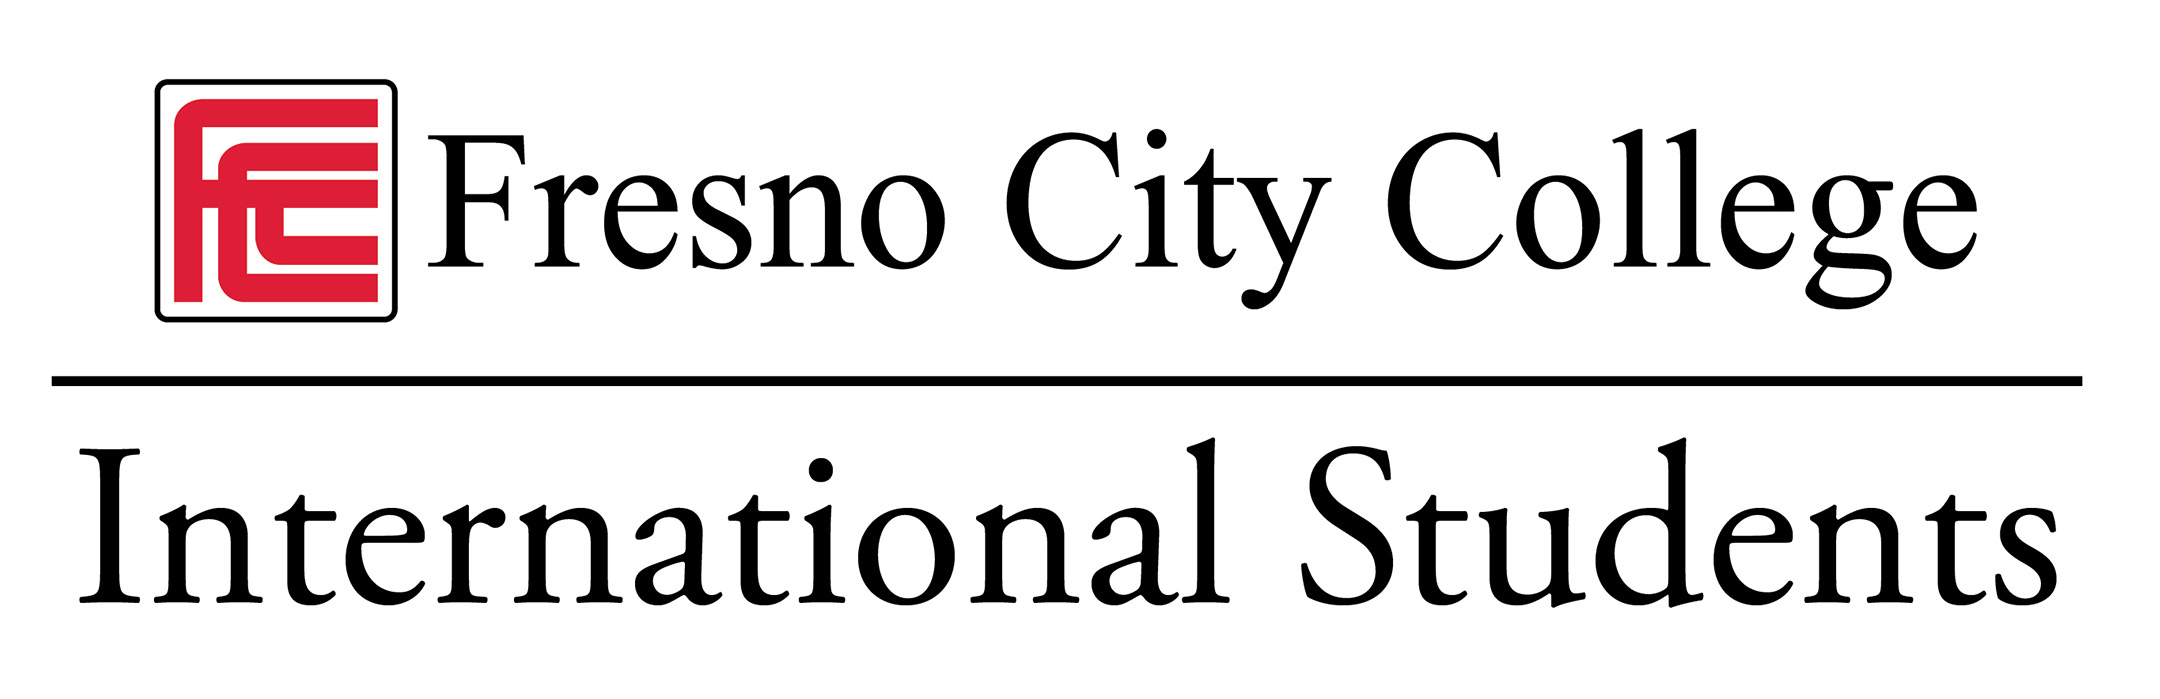 Fresno City College International Students Department Graphic